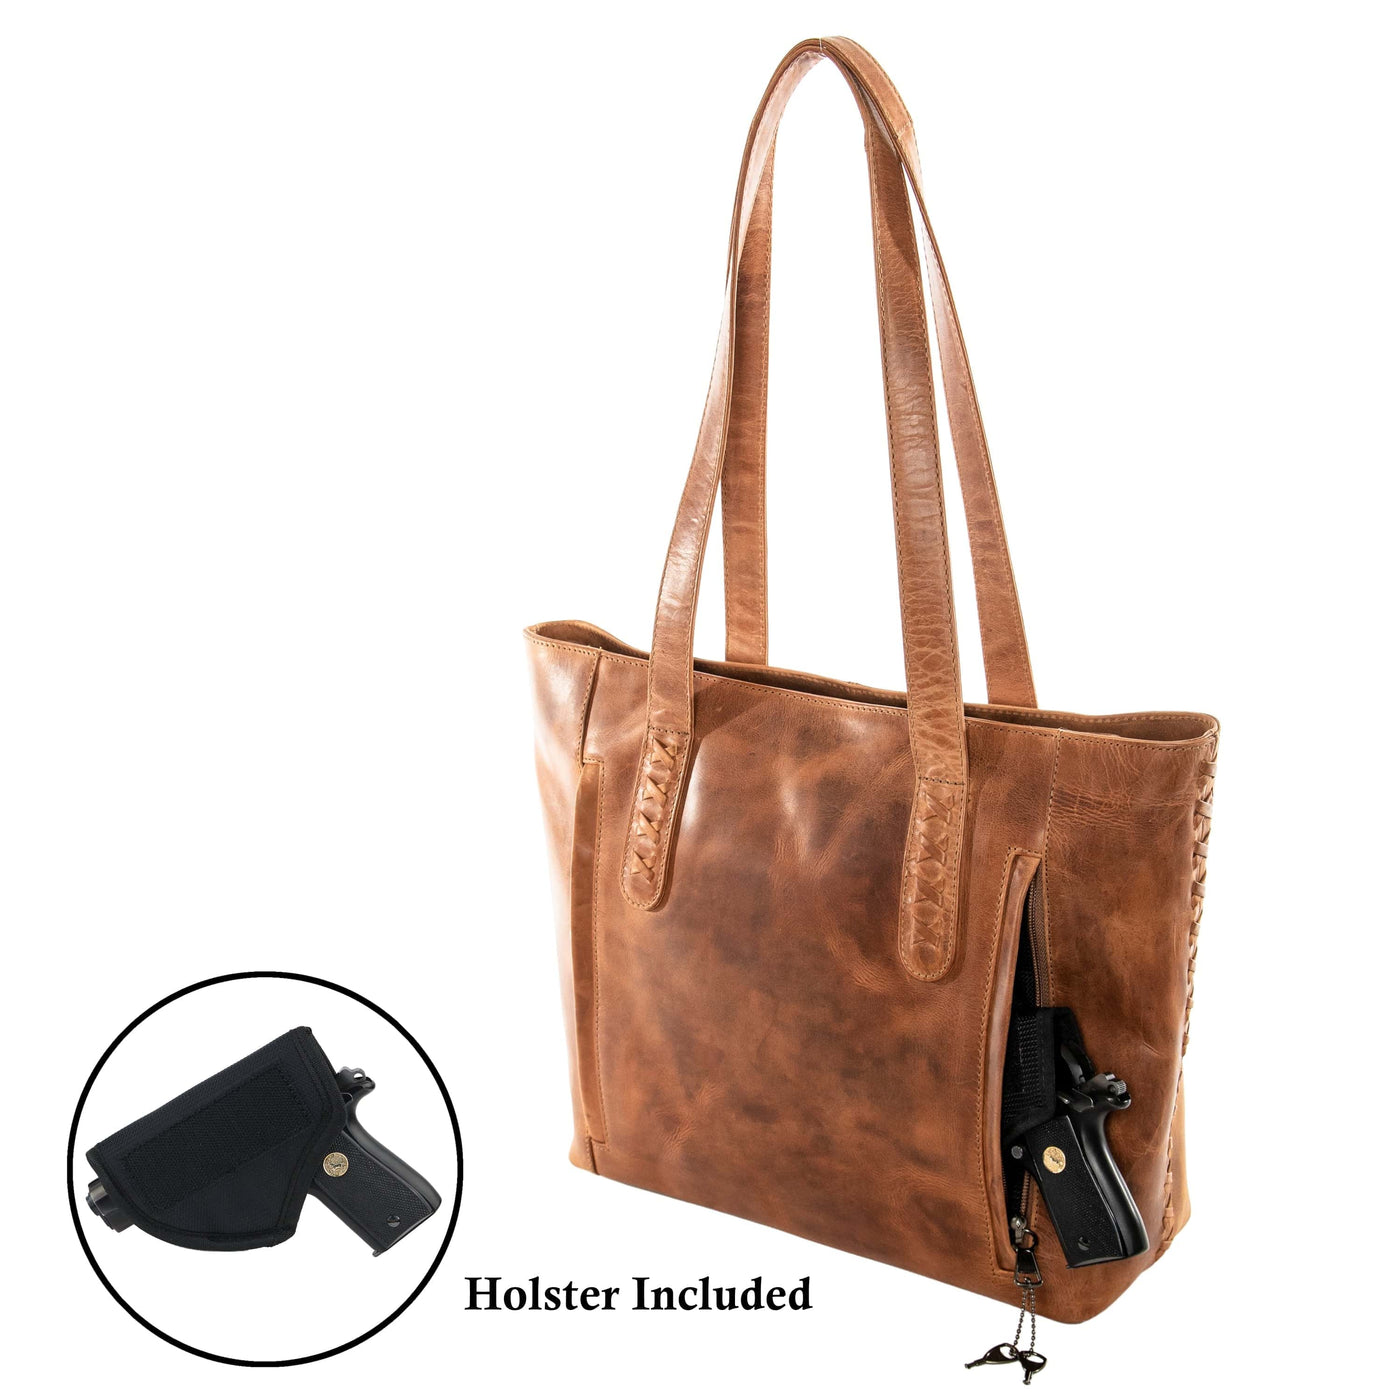 Concealed Carry Norah Large Leather Tote - Lady Conceal - Concealed Carry Purse 